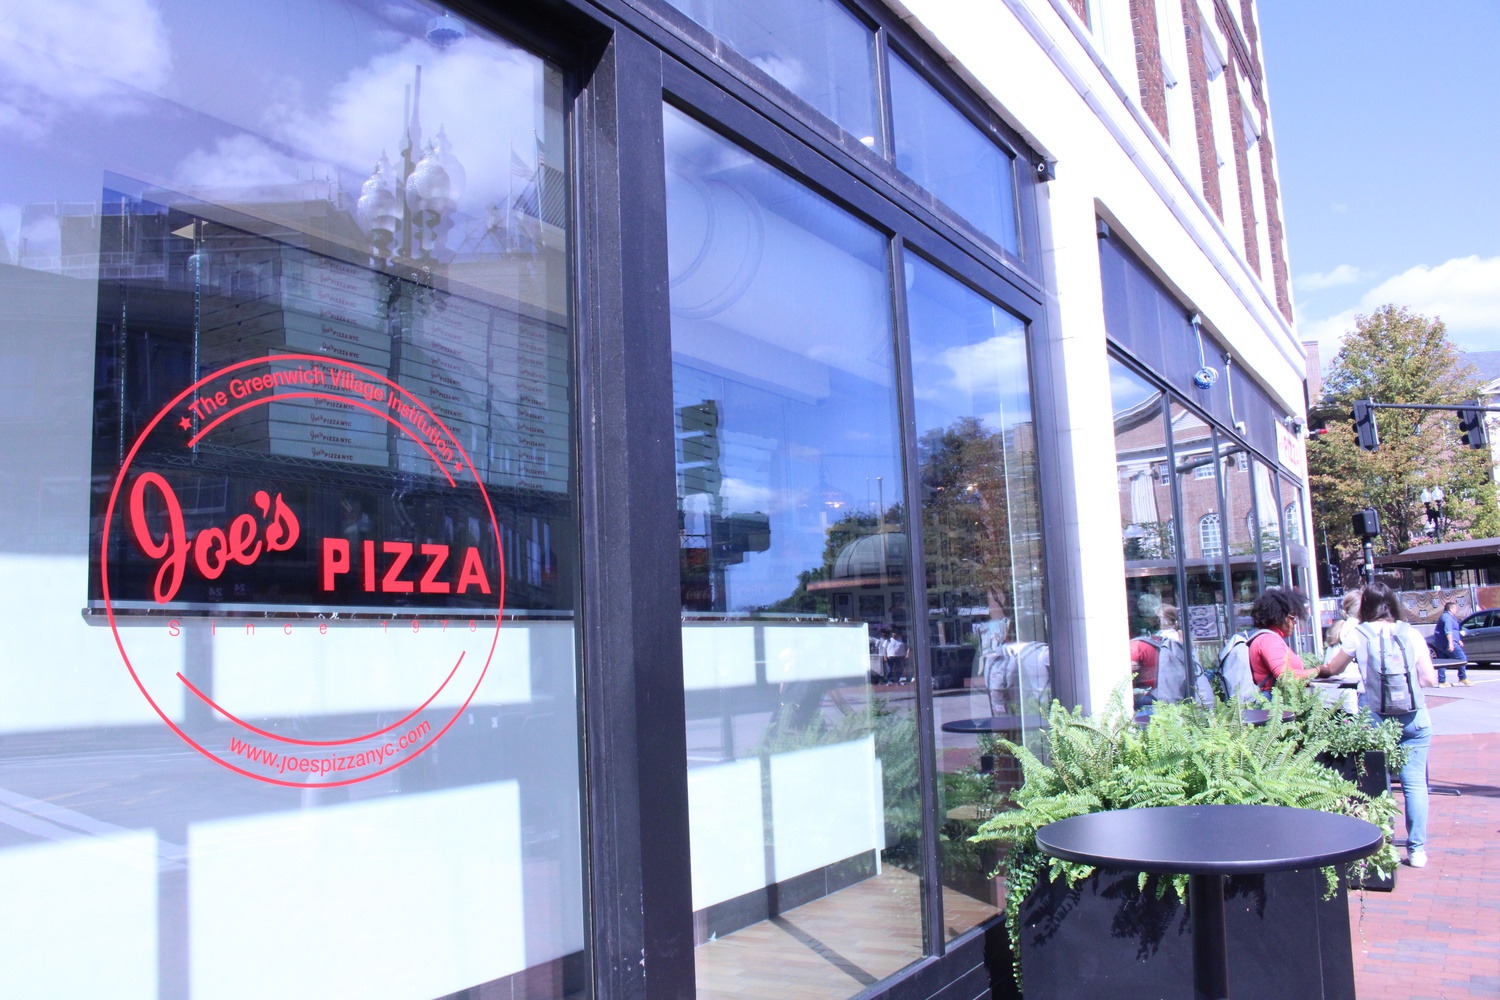 Joe's Pizza is located at 3 Brattle St., the former storefront of Milk Bar and &amp;pizza.